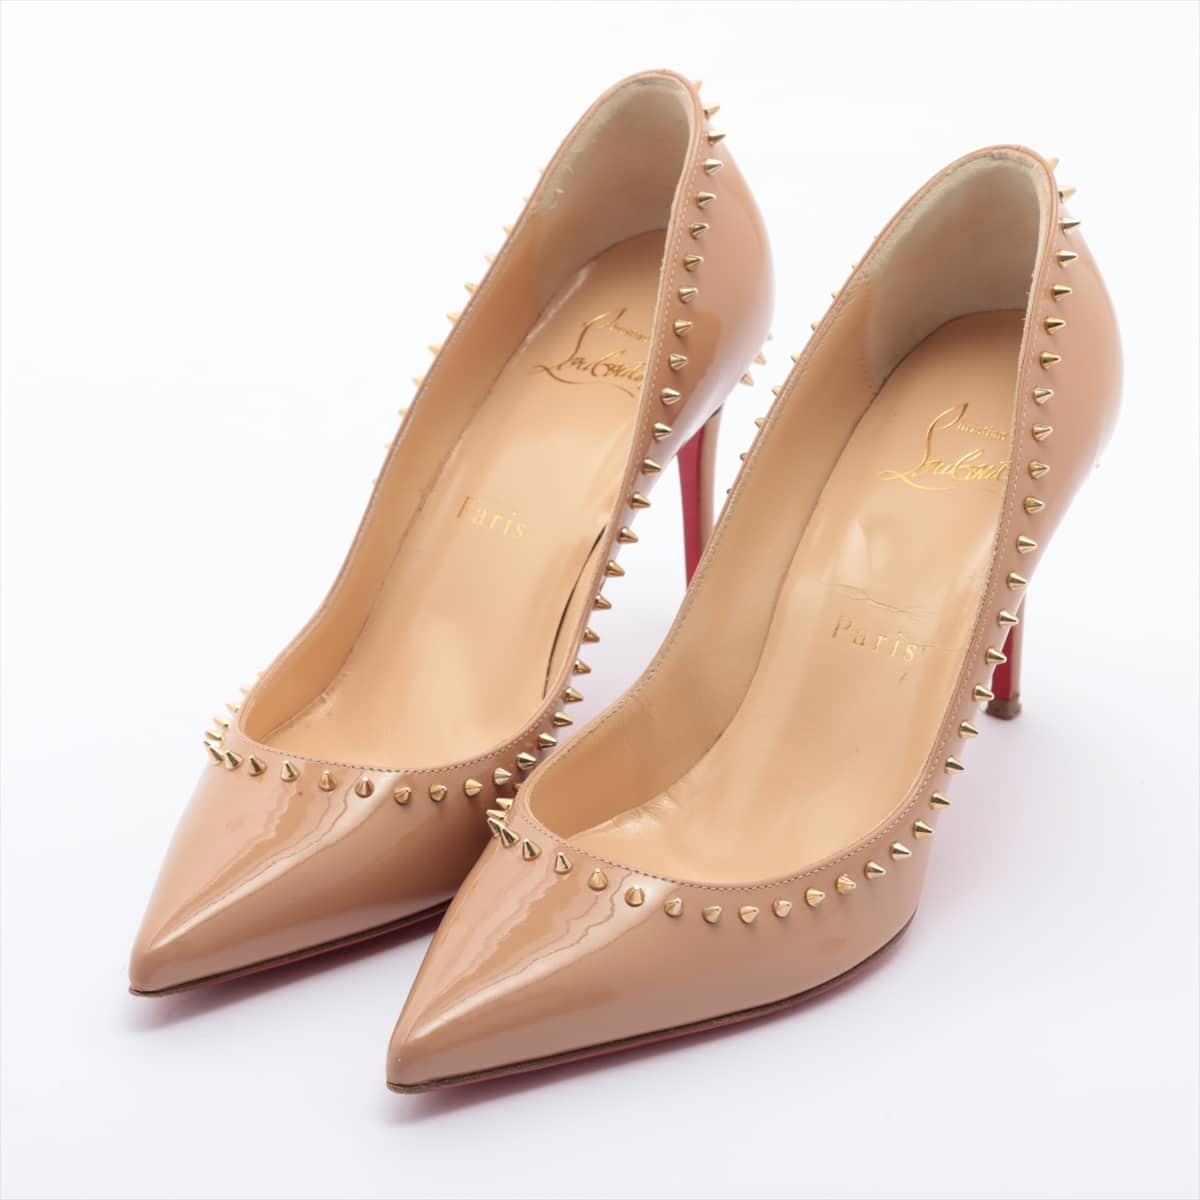 Christian Louboutin Patent leather Pumps 36 Ladies' Beige Spike Studs